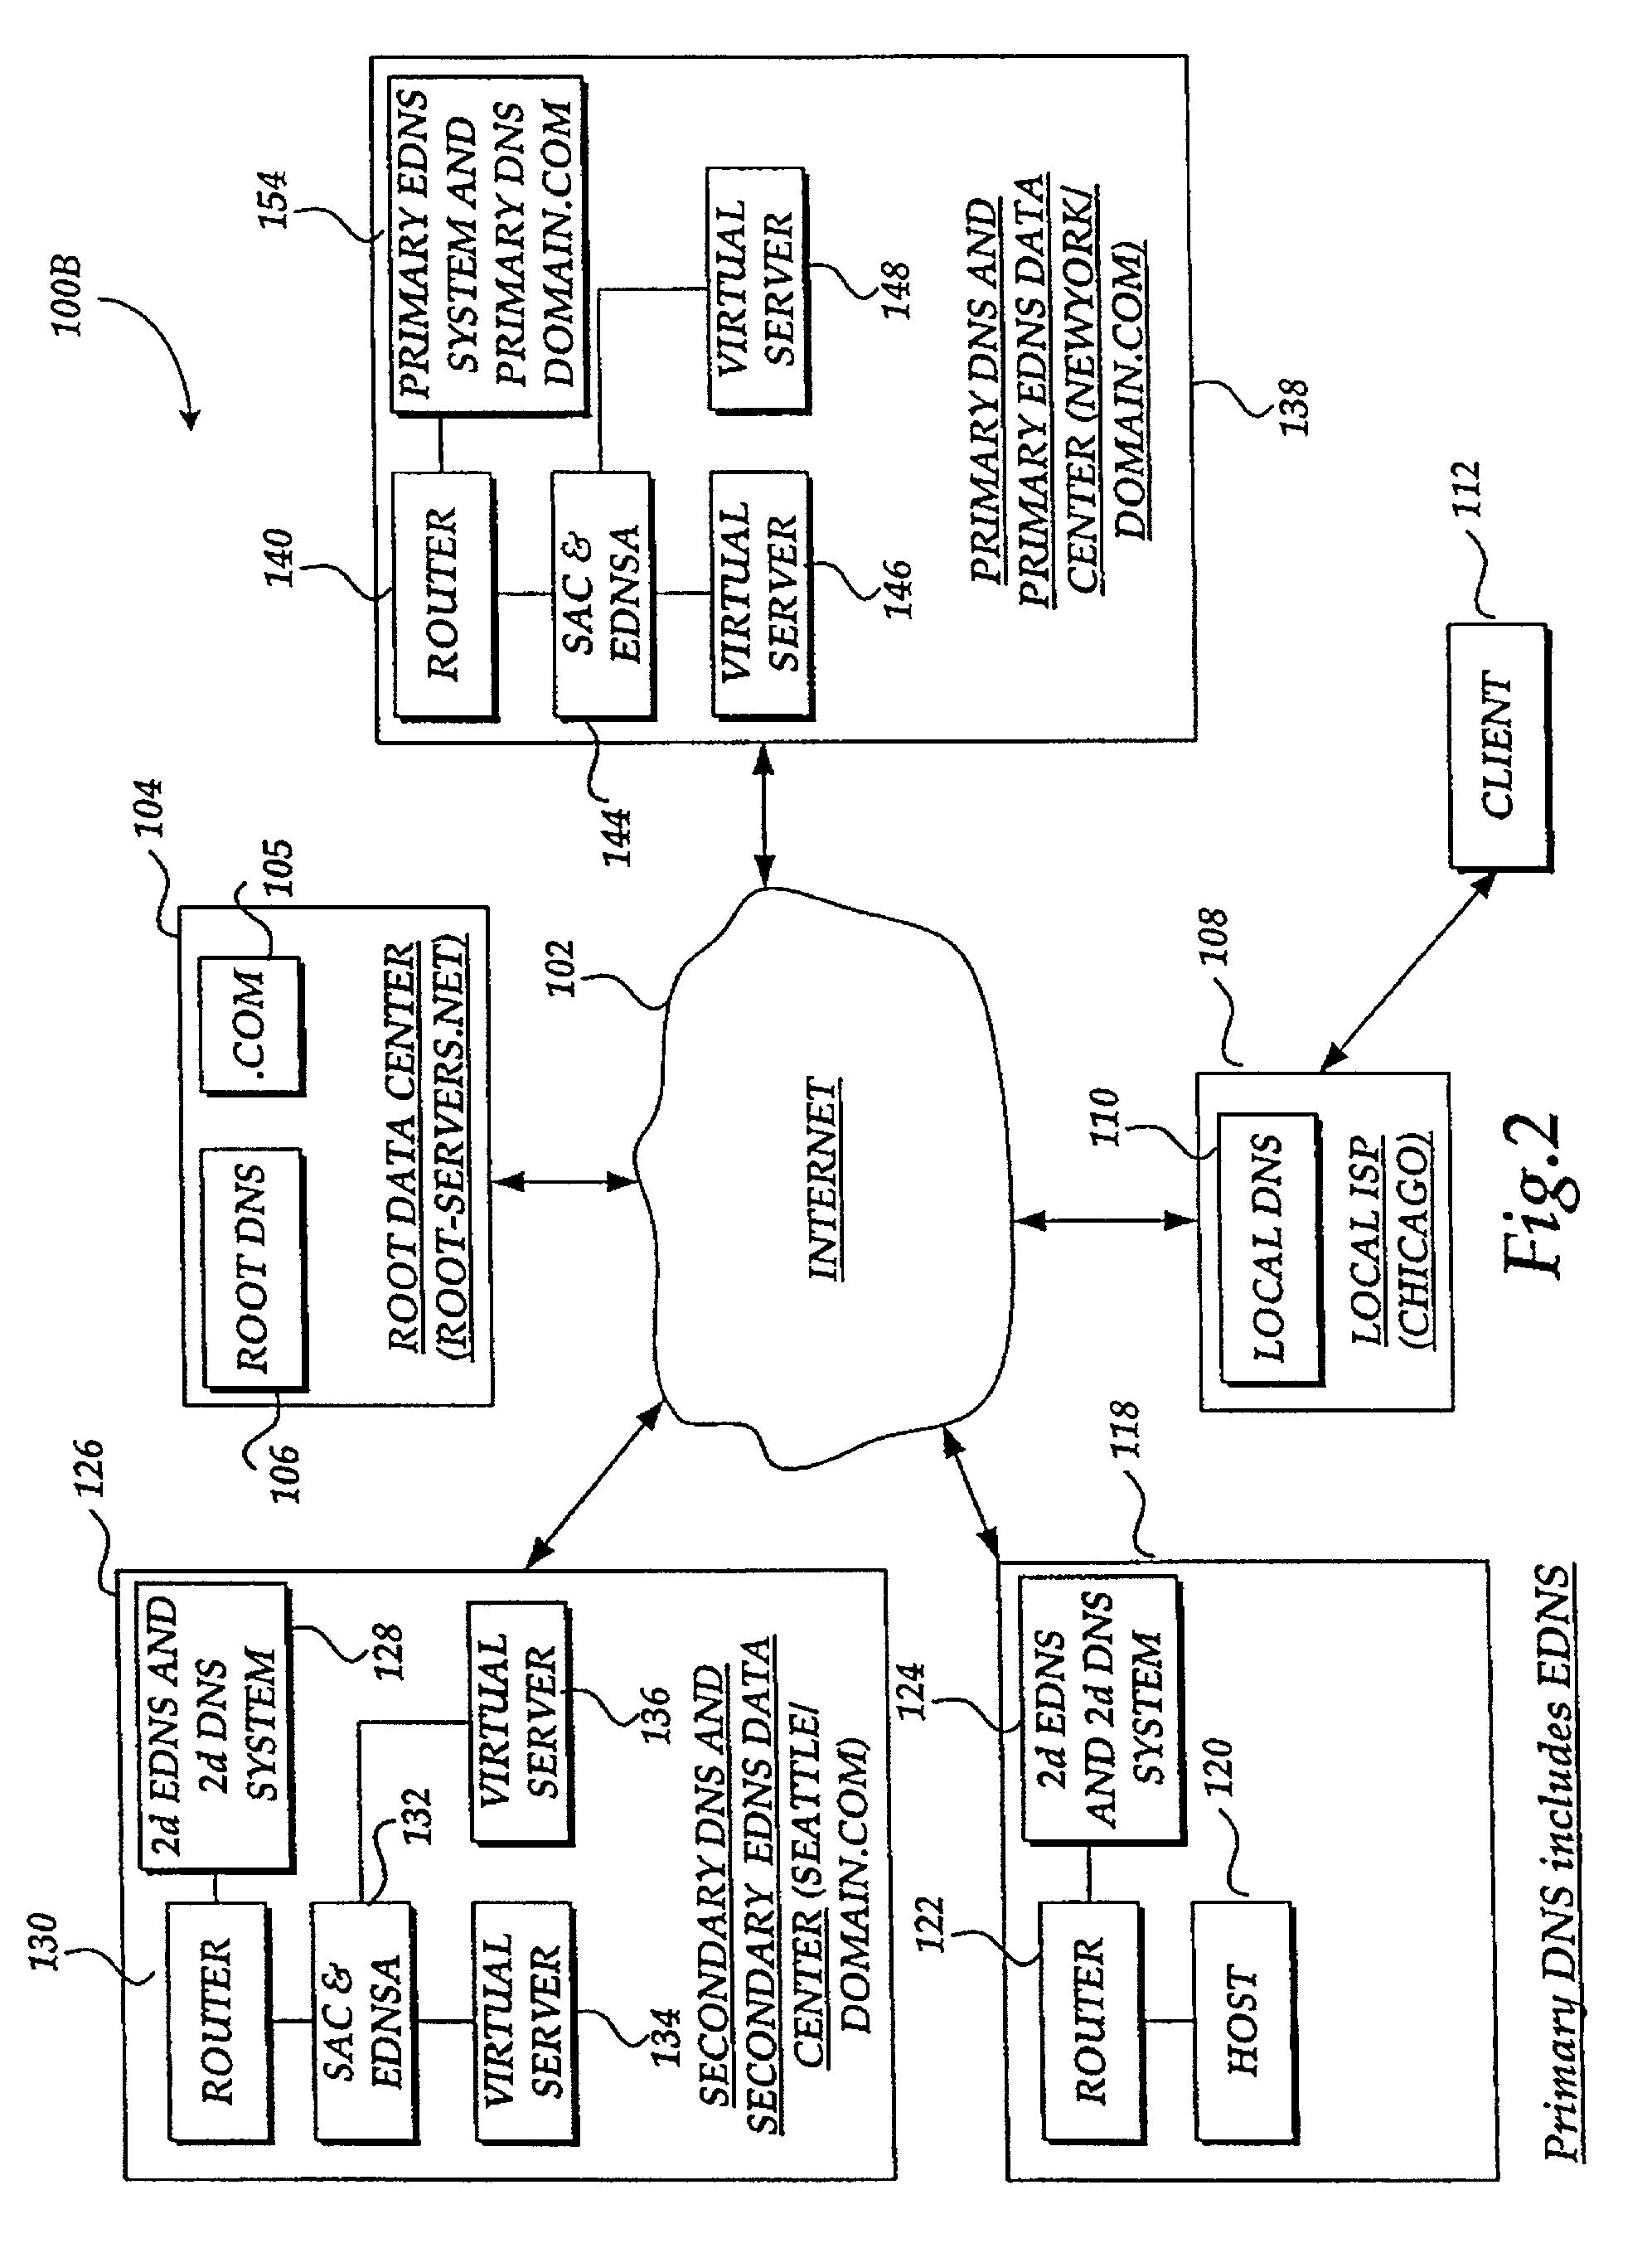 Method and system for balancing load distribution on a wide area network